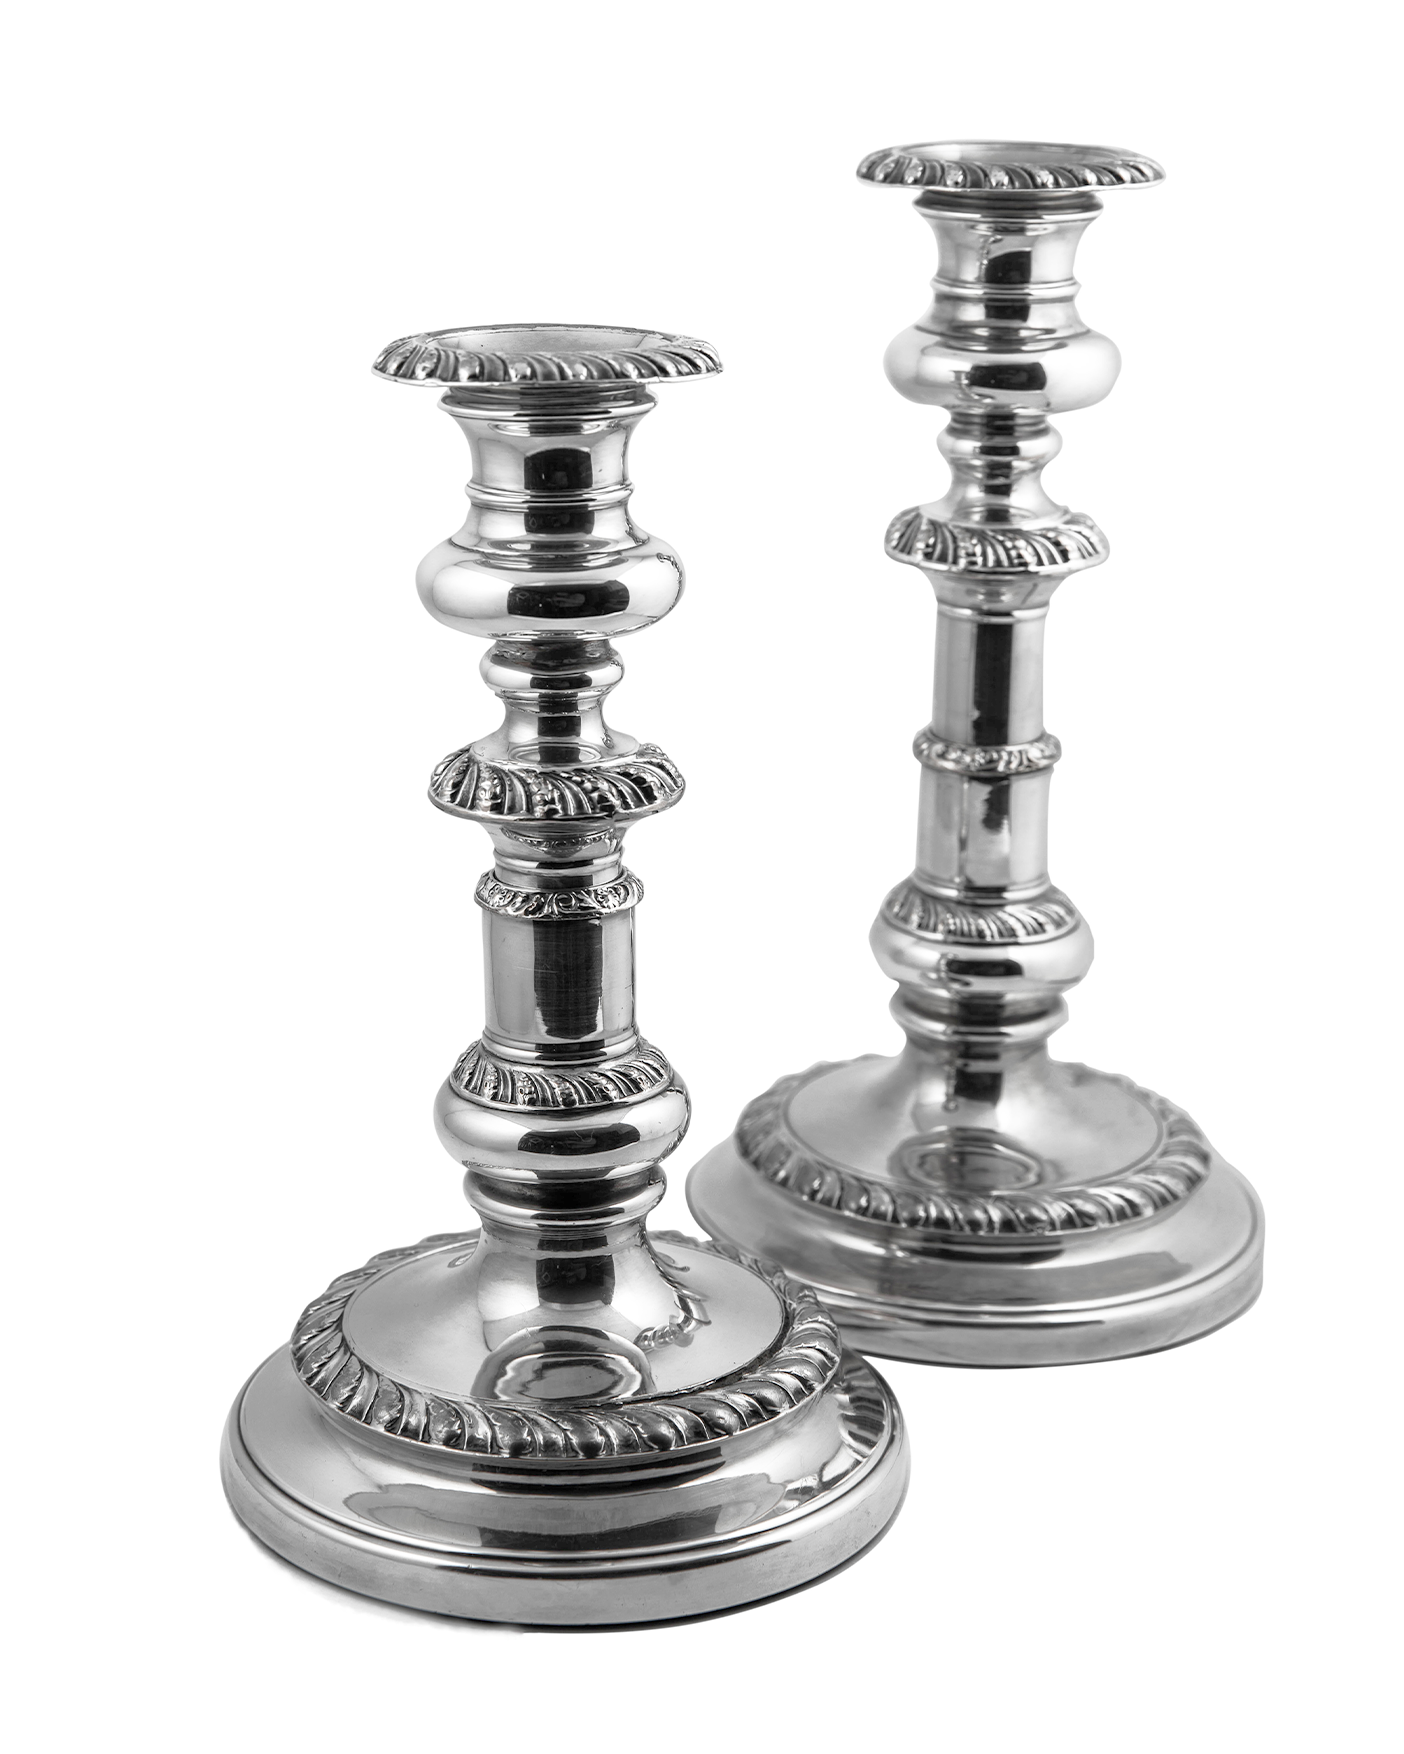 Pair of Antique Candlesticks Queen Anne style in old sheffield